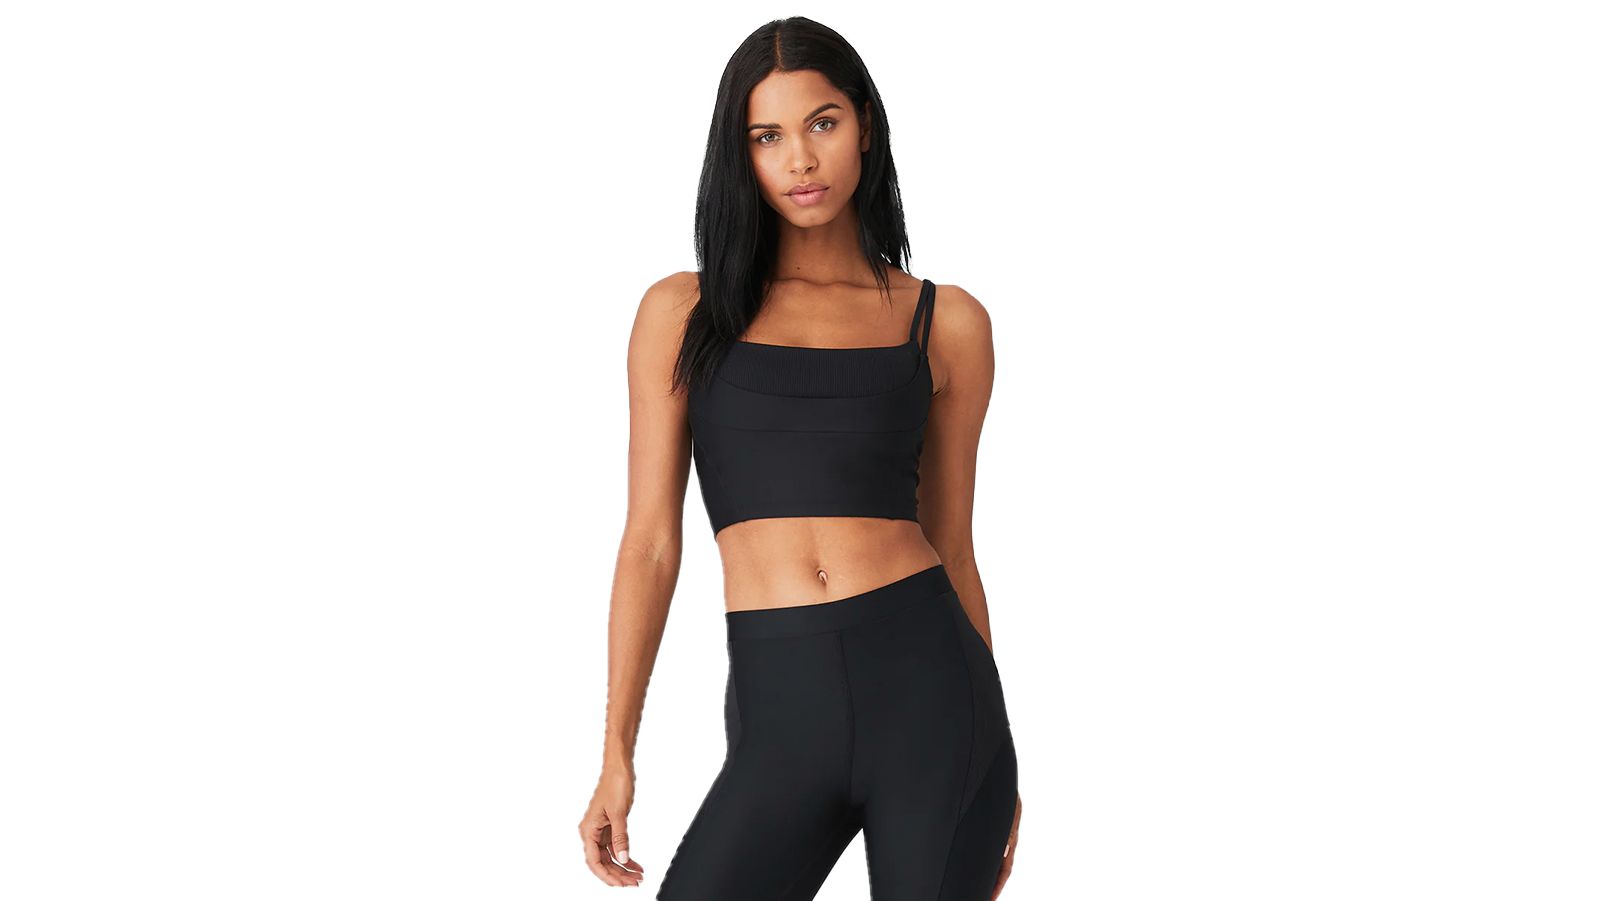 Can You Wear A Sports Bra With A Waist Trainer? – solowomen